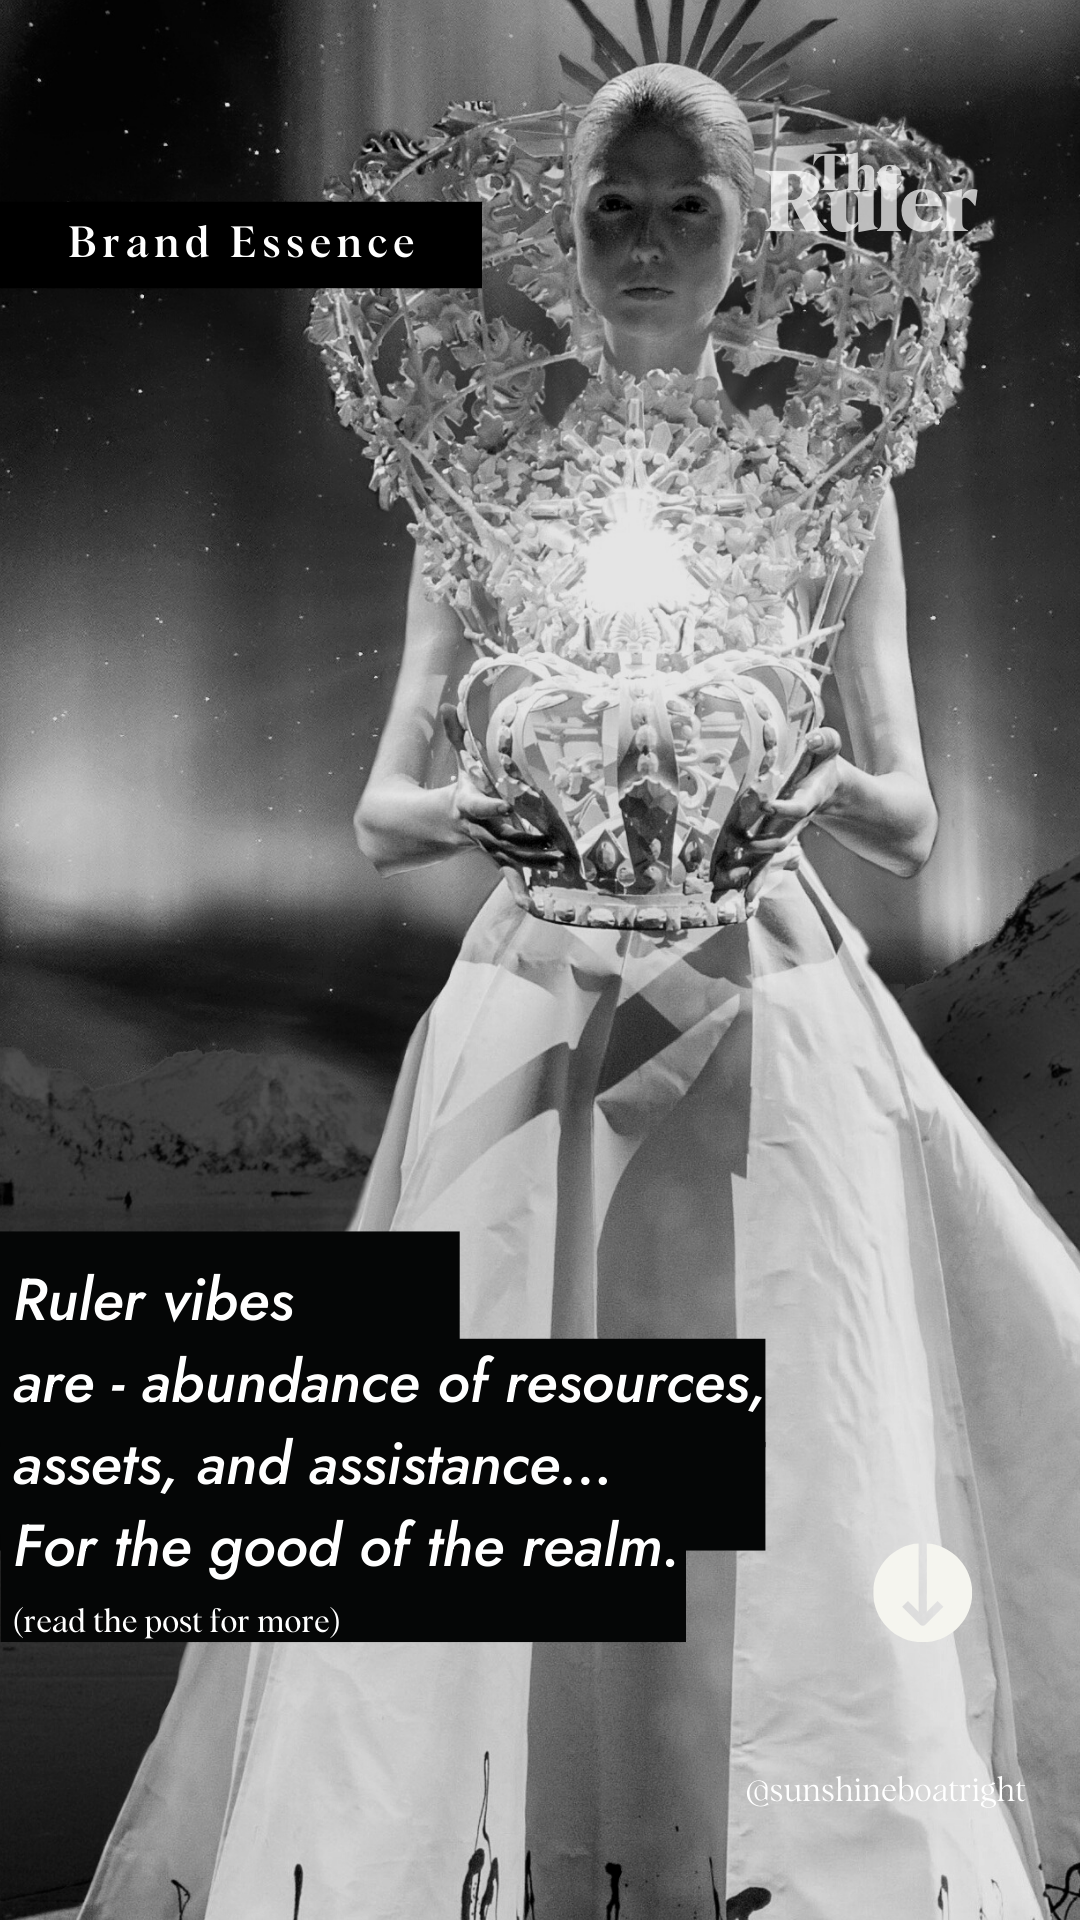 Brand Archetype Essence: Ruler vibes are abundance of resources assets and assistance for the good of the realm.